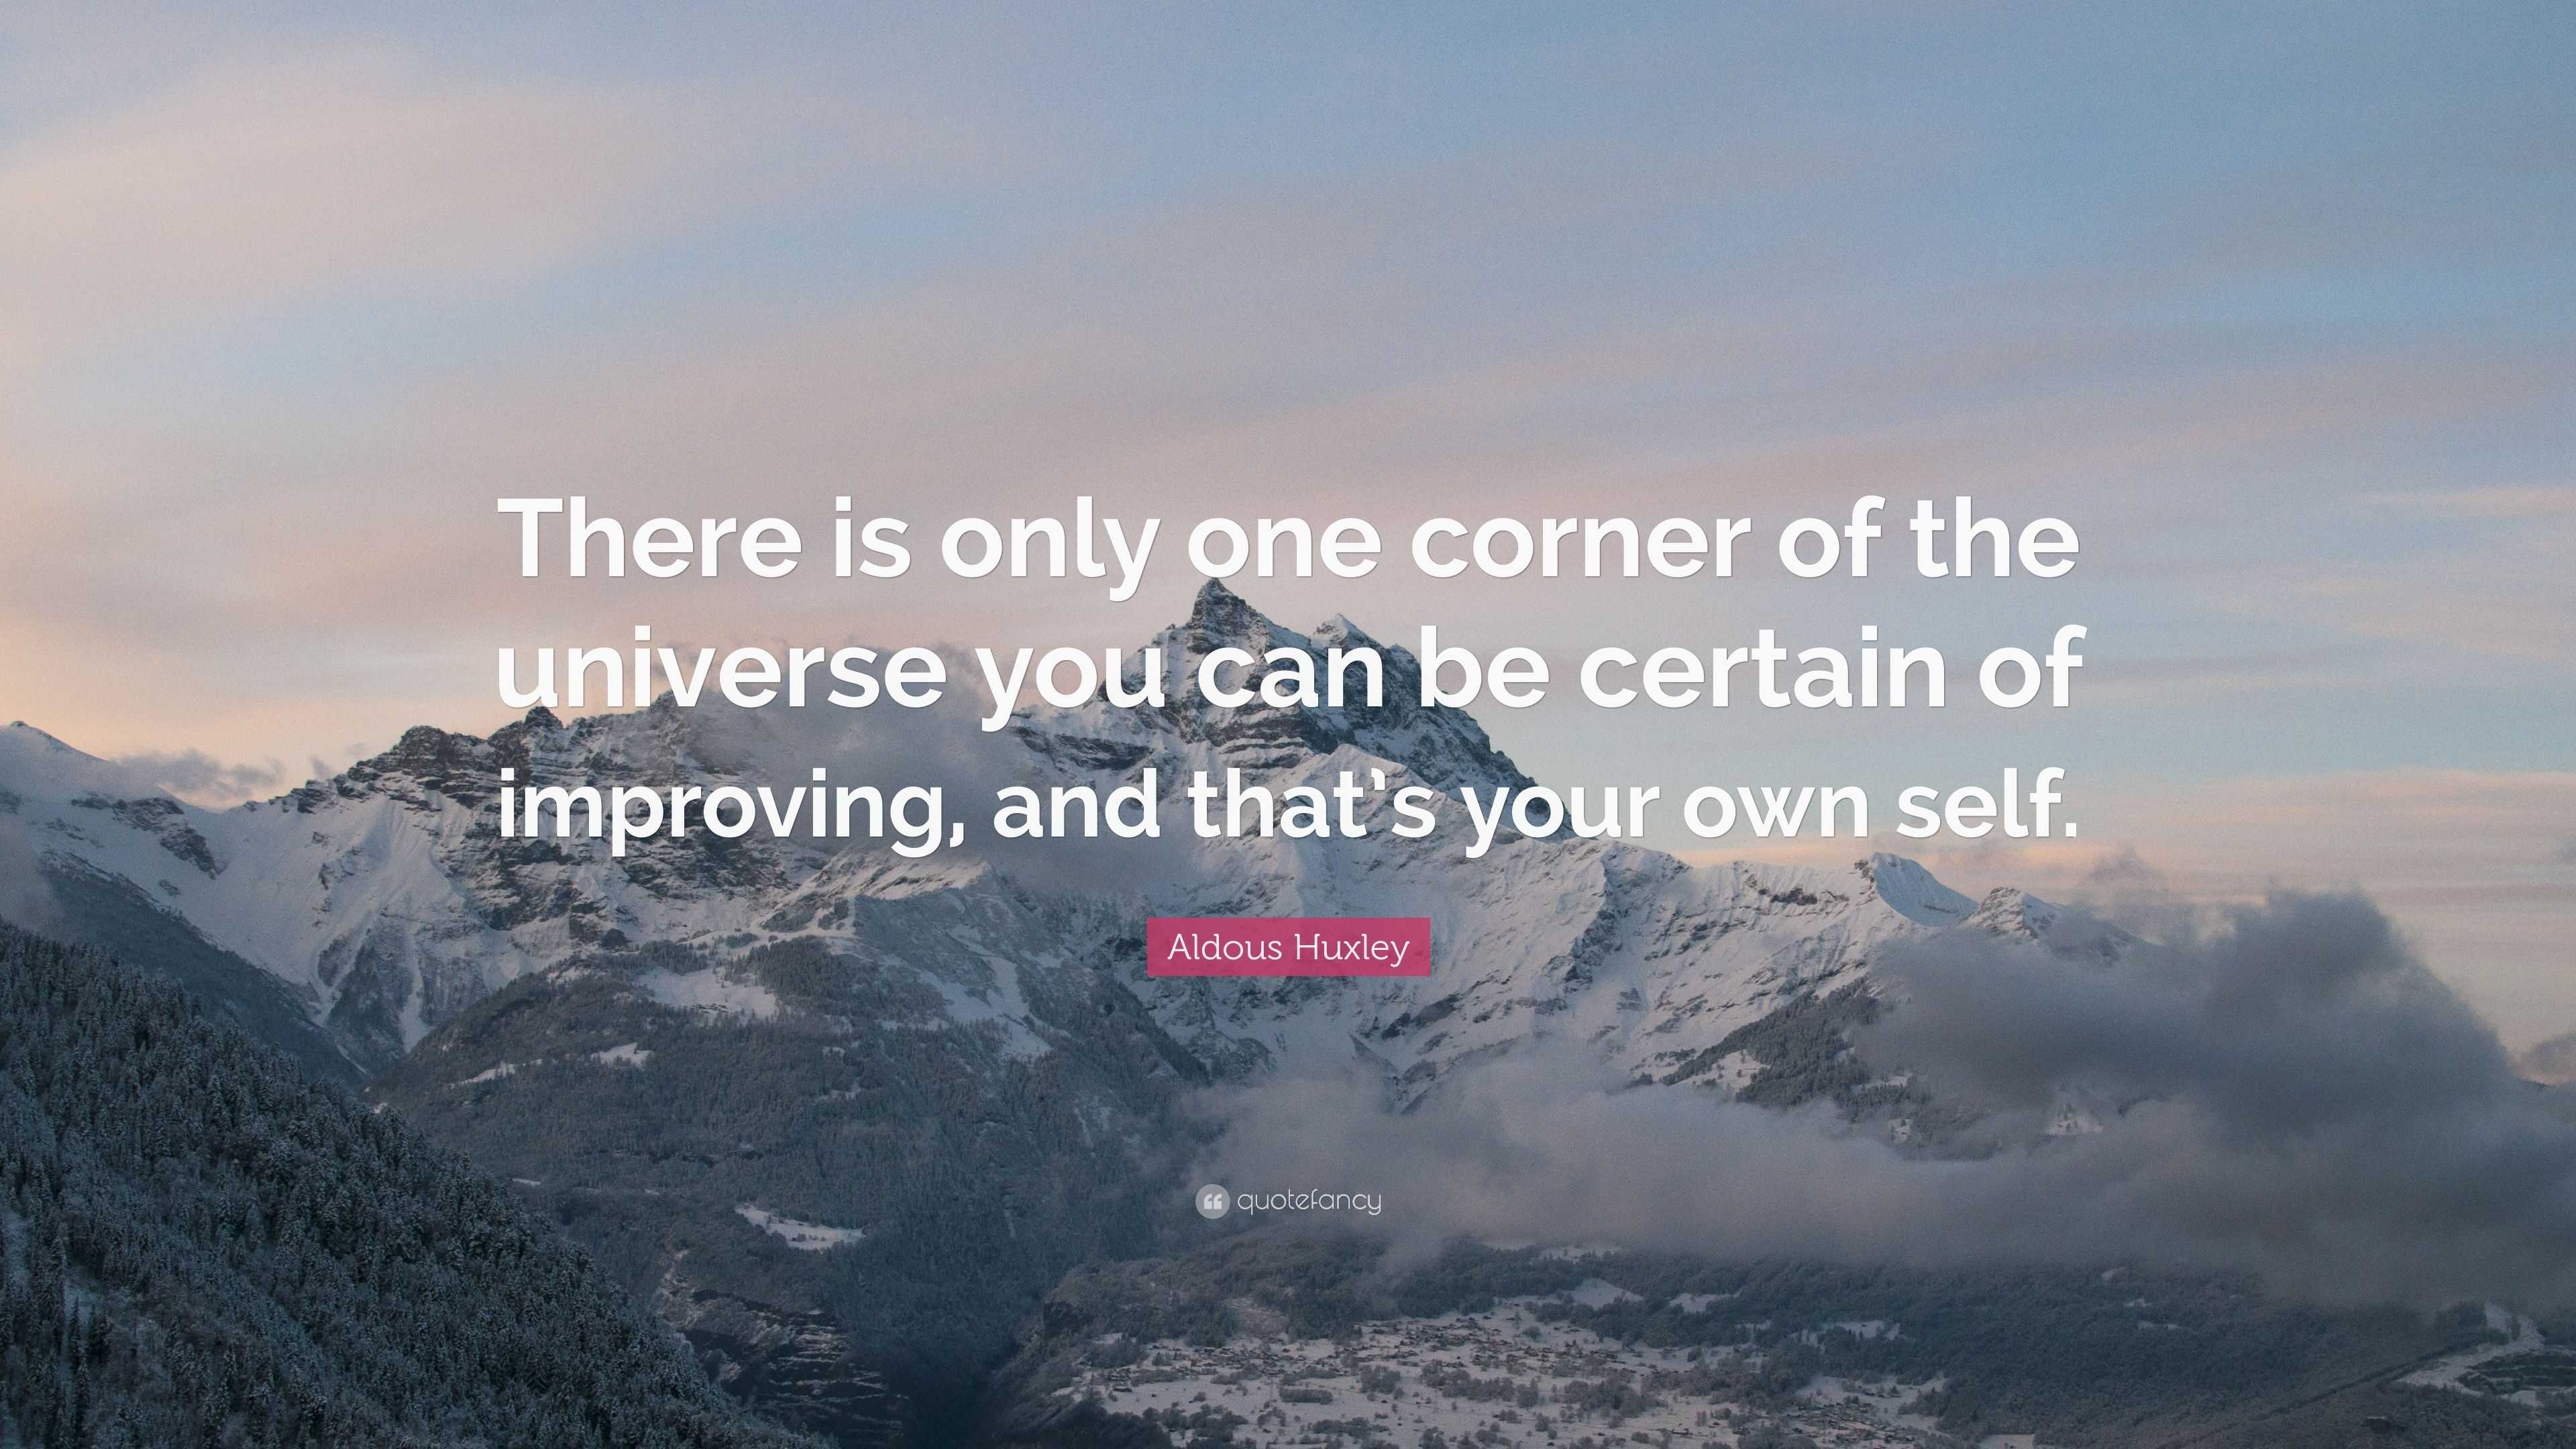 Aldous Huxley Quote: “There is only one corner of the universe you can ...